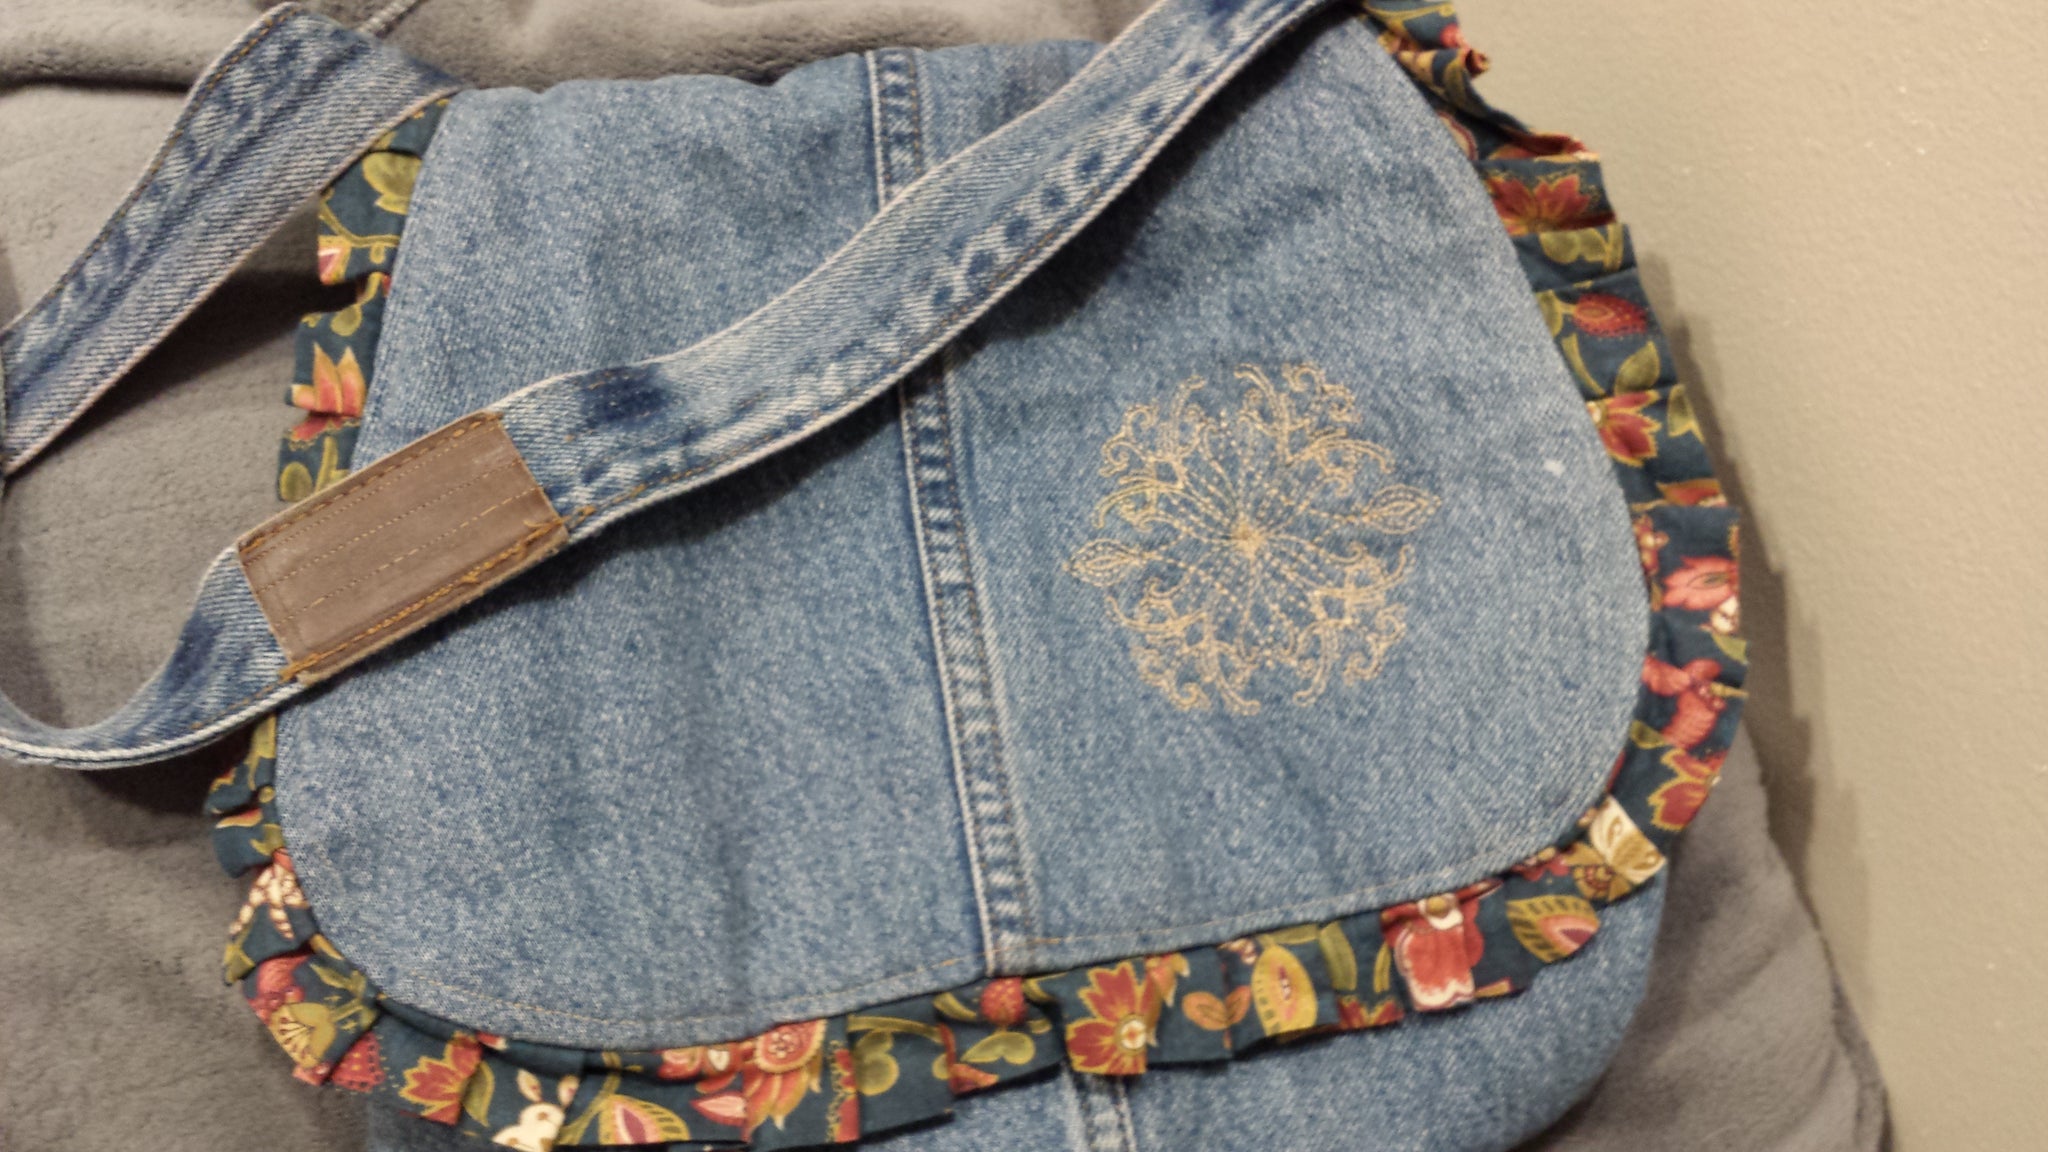 Justin's Jeans upcycled denim bags, hand made in Norfolk UK